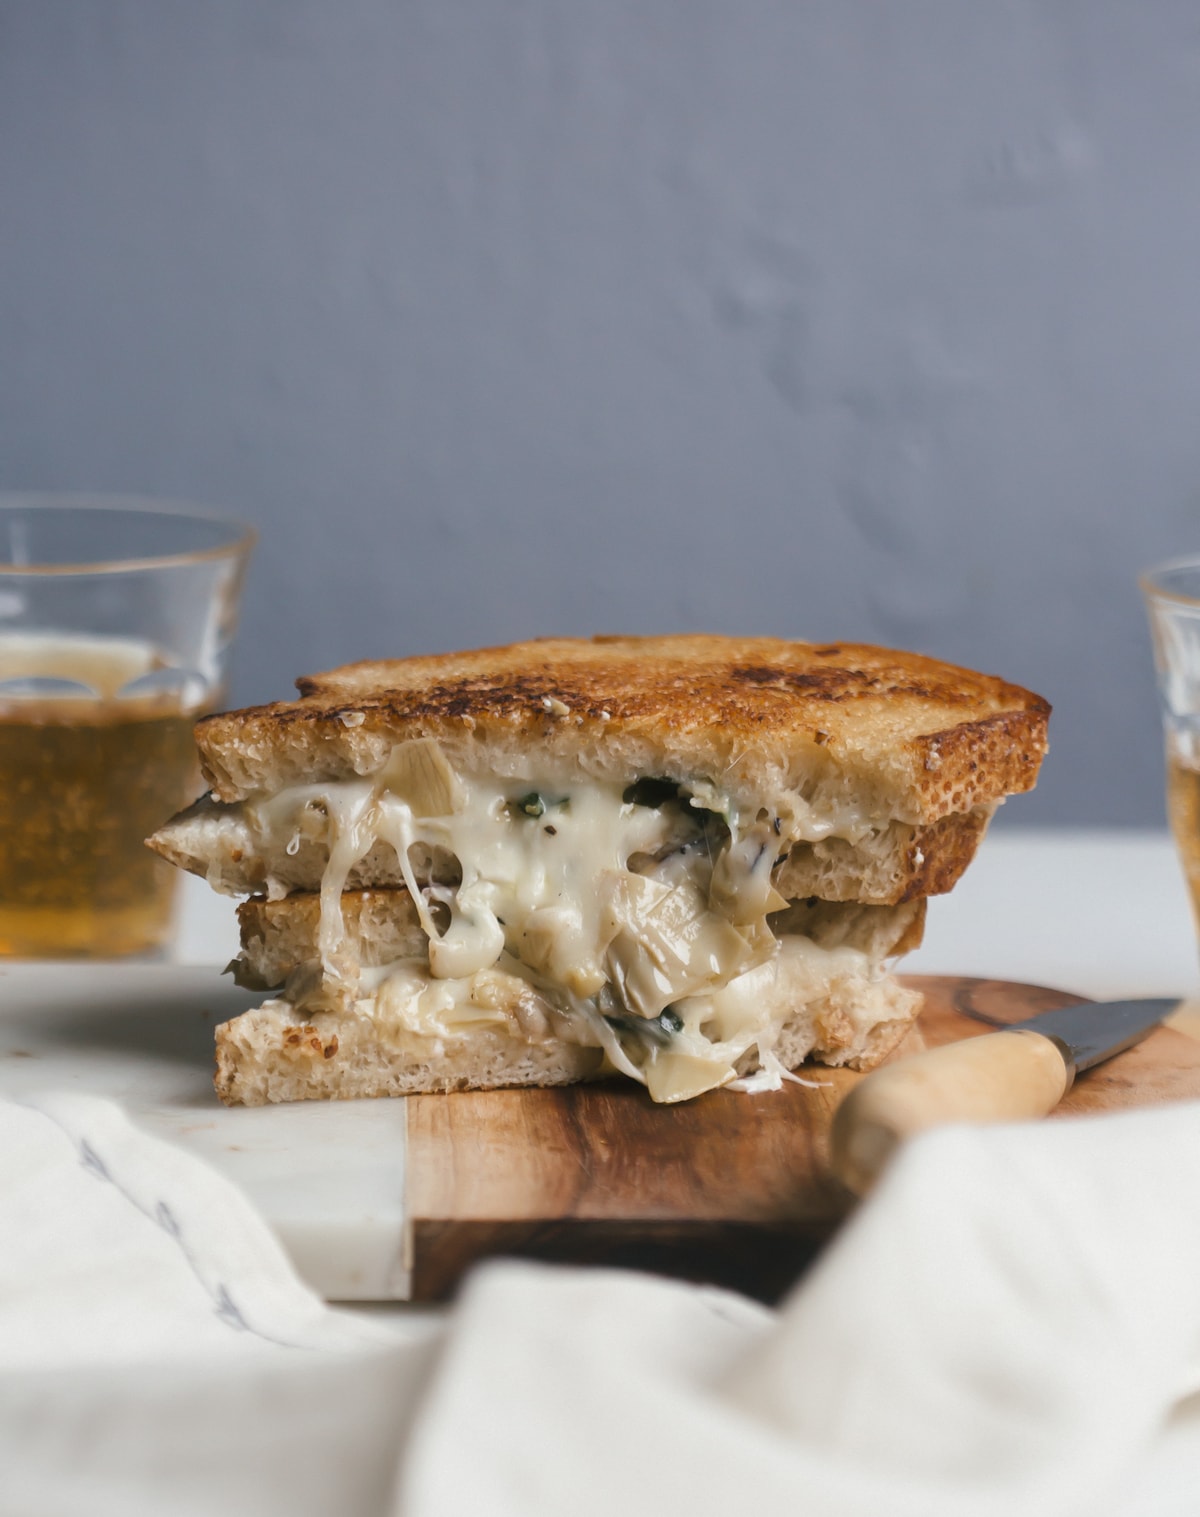 Spinach & Artichoke Dip Grilled Cheese